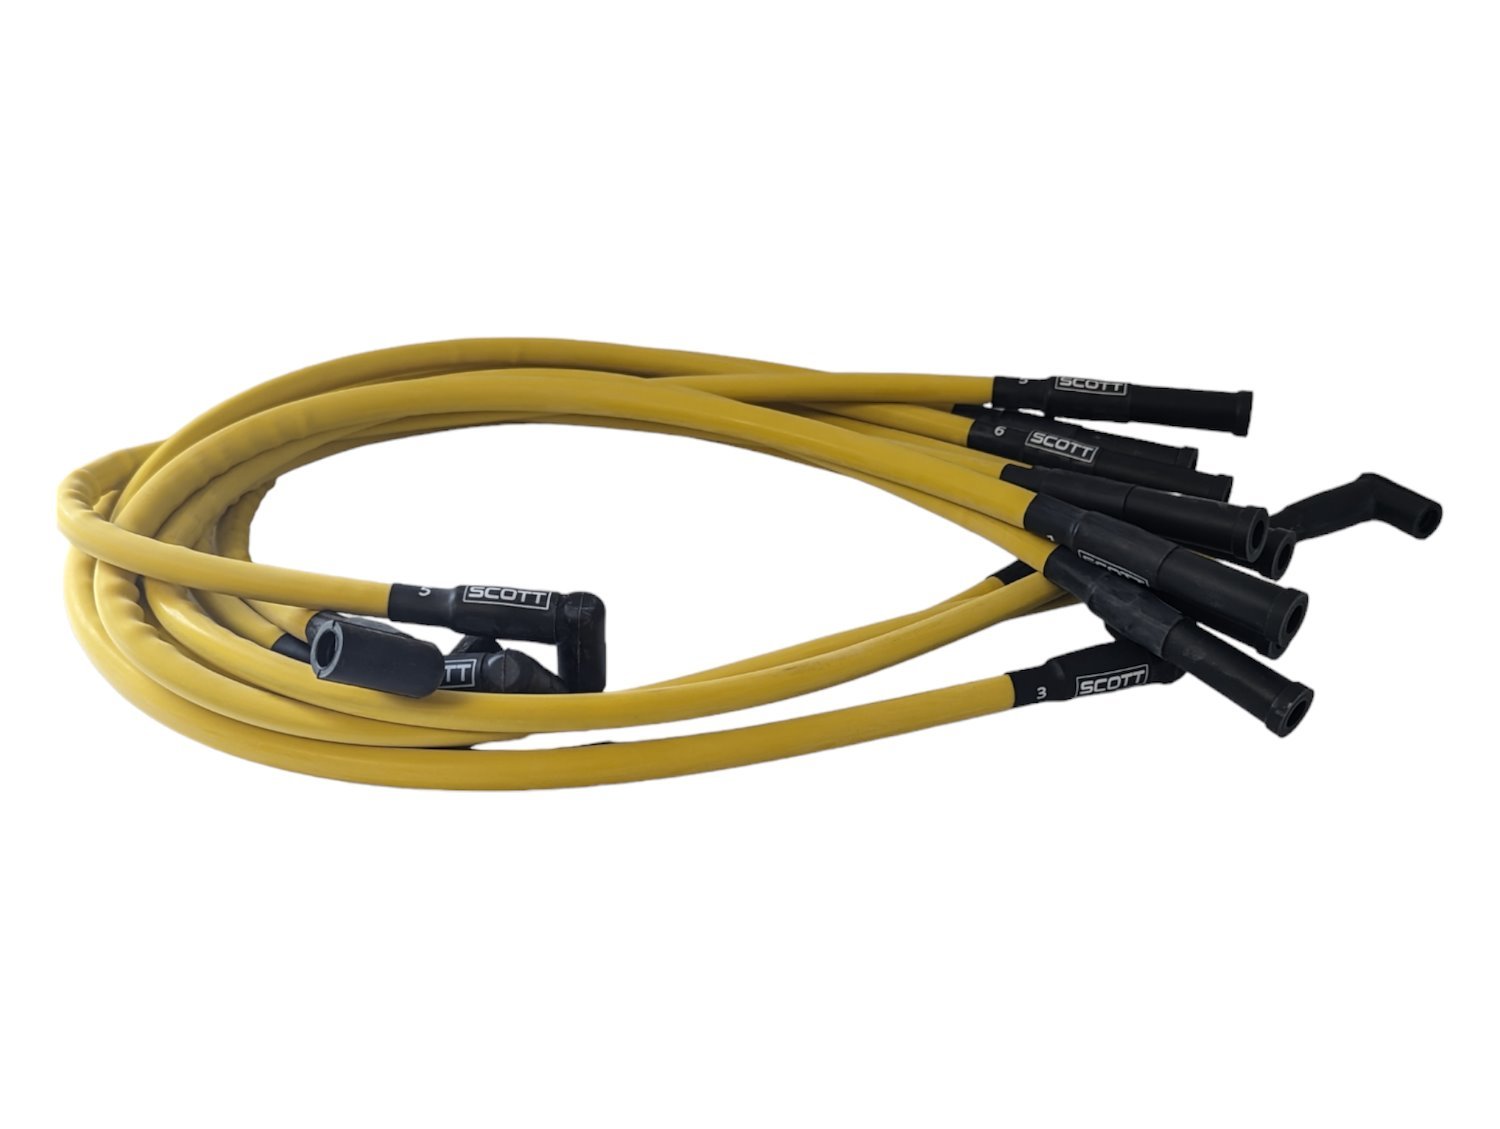 SPW300-CH-421-7 Super Mag Fiberglass-Oversleeved Spark Plug Wire Set for Small Block Chevy, Over Valve Cover [Yellow]